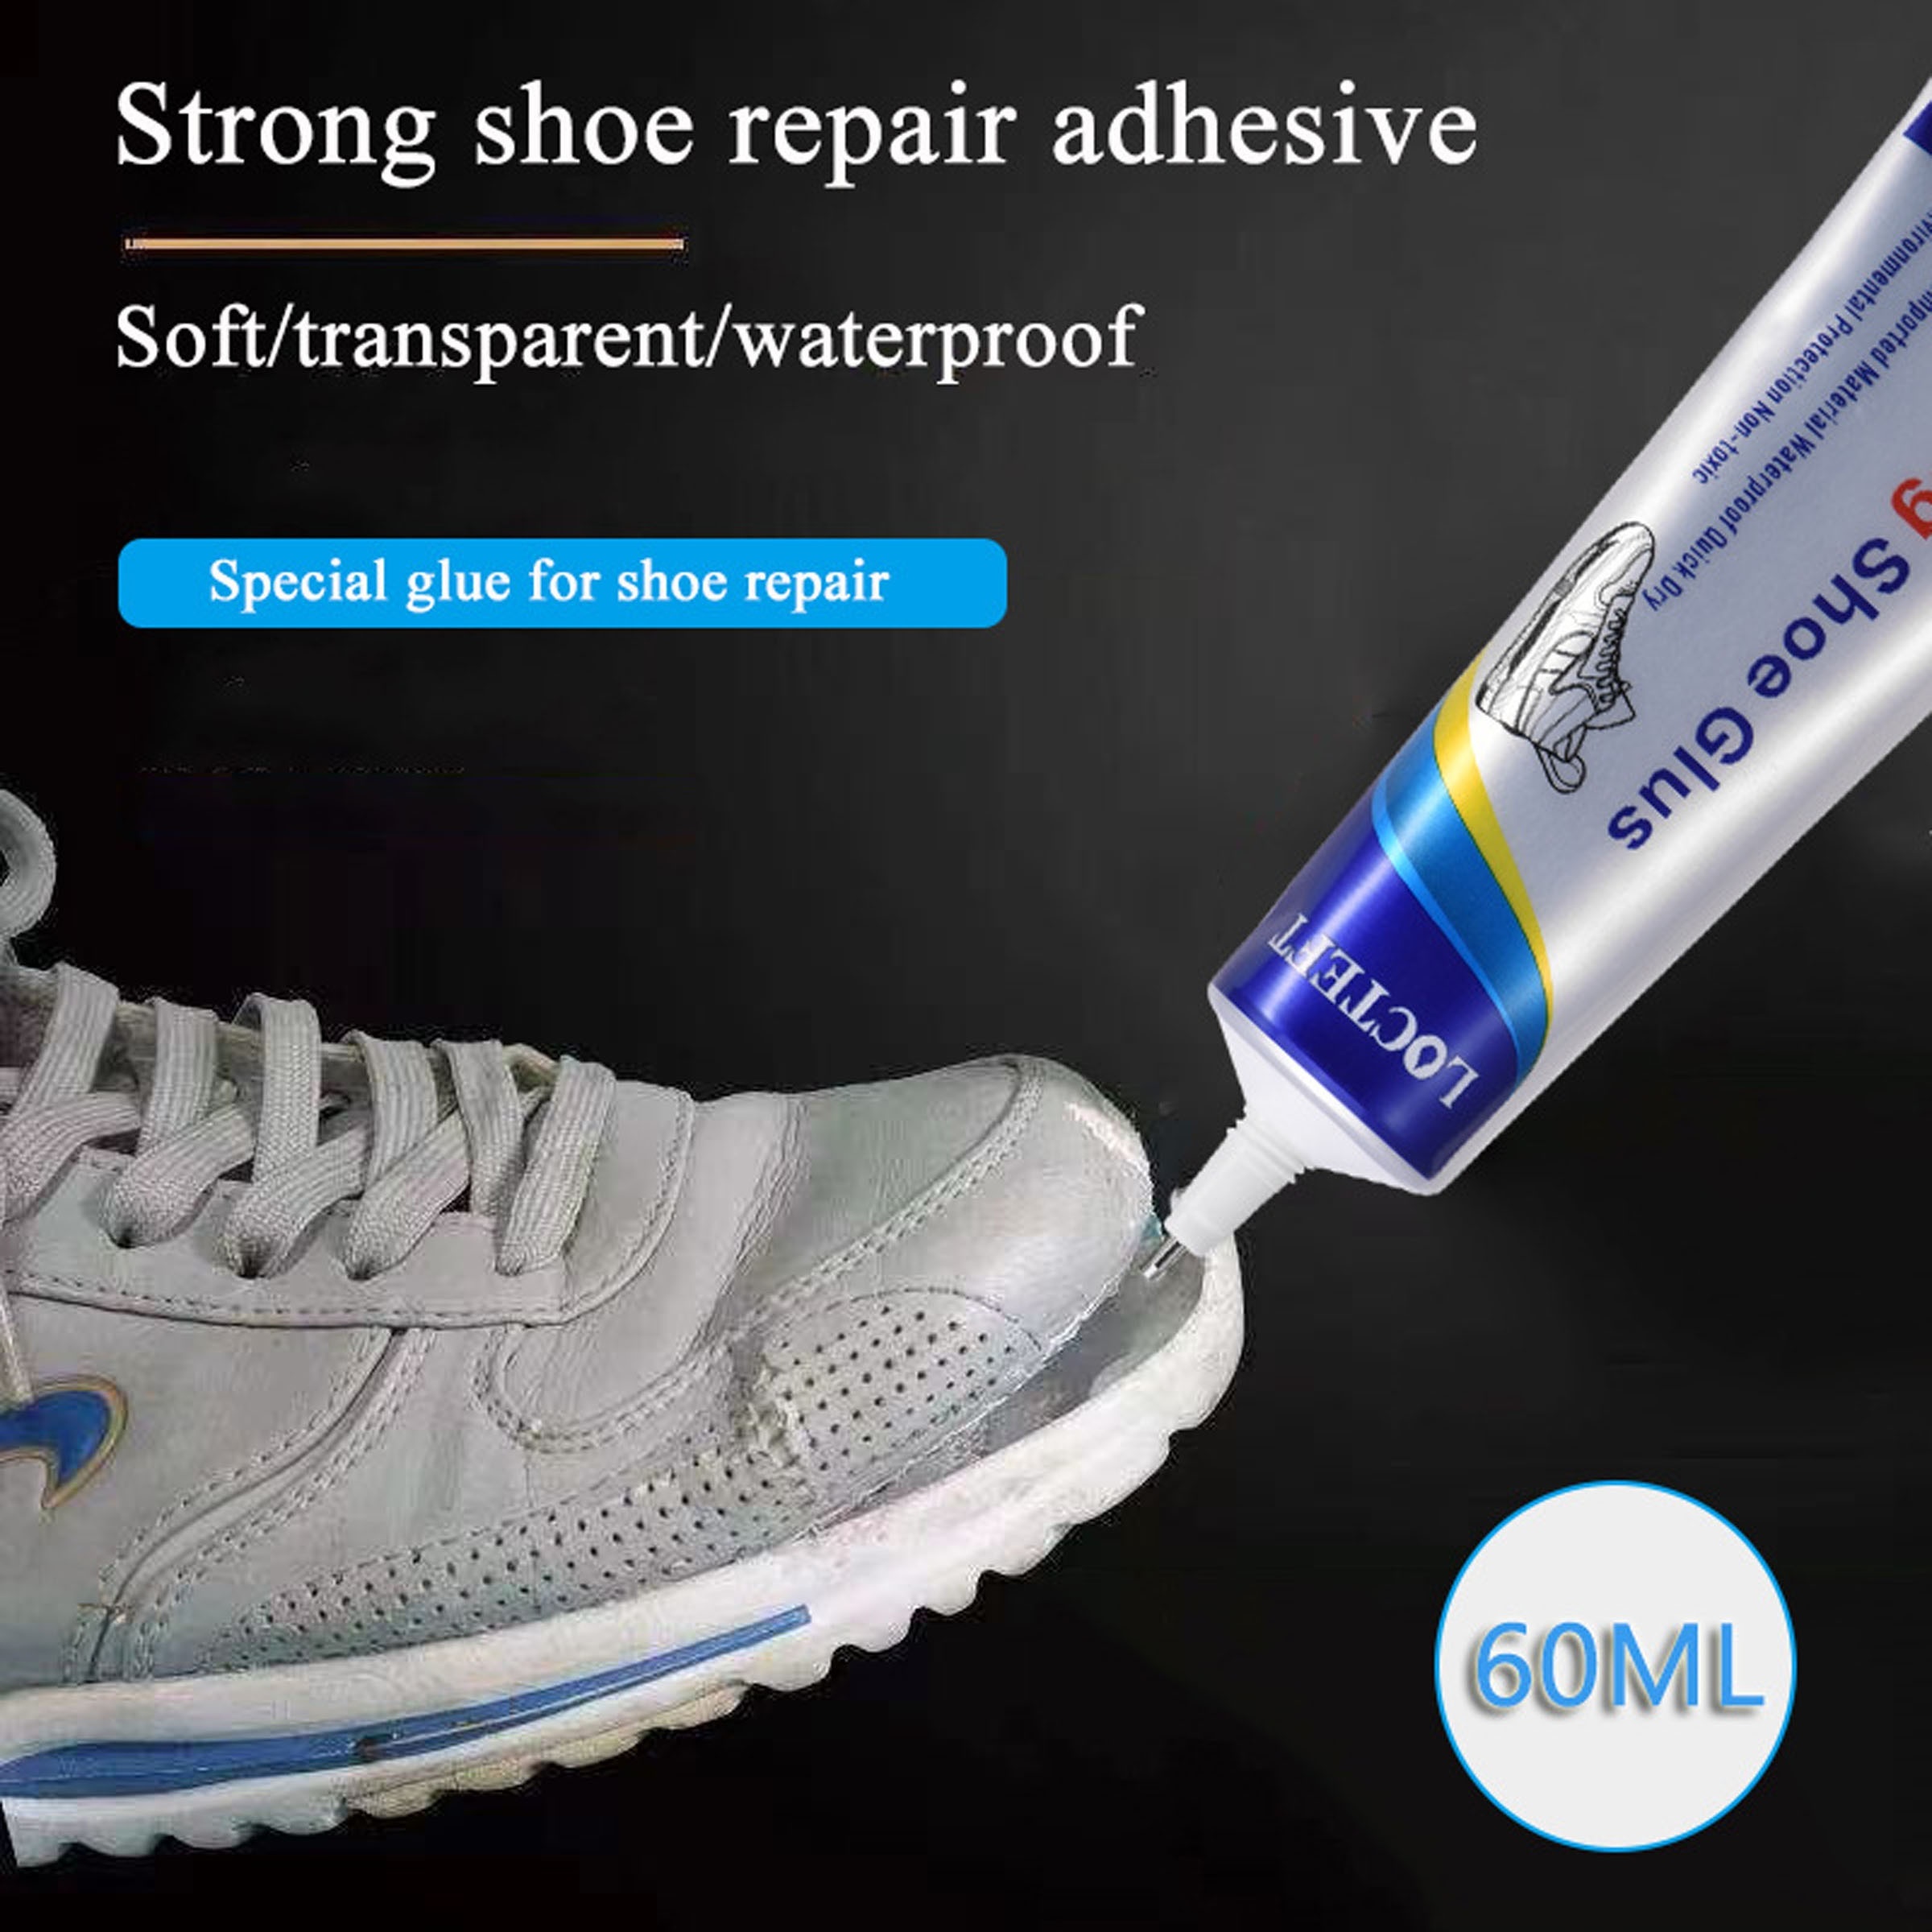 Shoe Adhesive Adhesive Shoe Repair Adhesive Shoemaker Shoe Factory Adhesive  Brand Shoes Unglue 401 Adhesive Sports Shoes Leather Shoes High-heeled  Sandals 502 Waterproof Quick-dry Shoe Adhesive Shoe Repair Glue